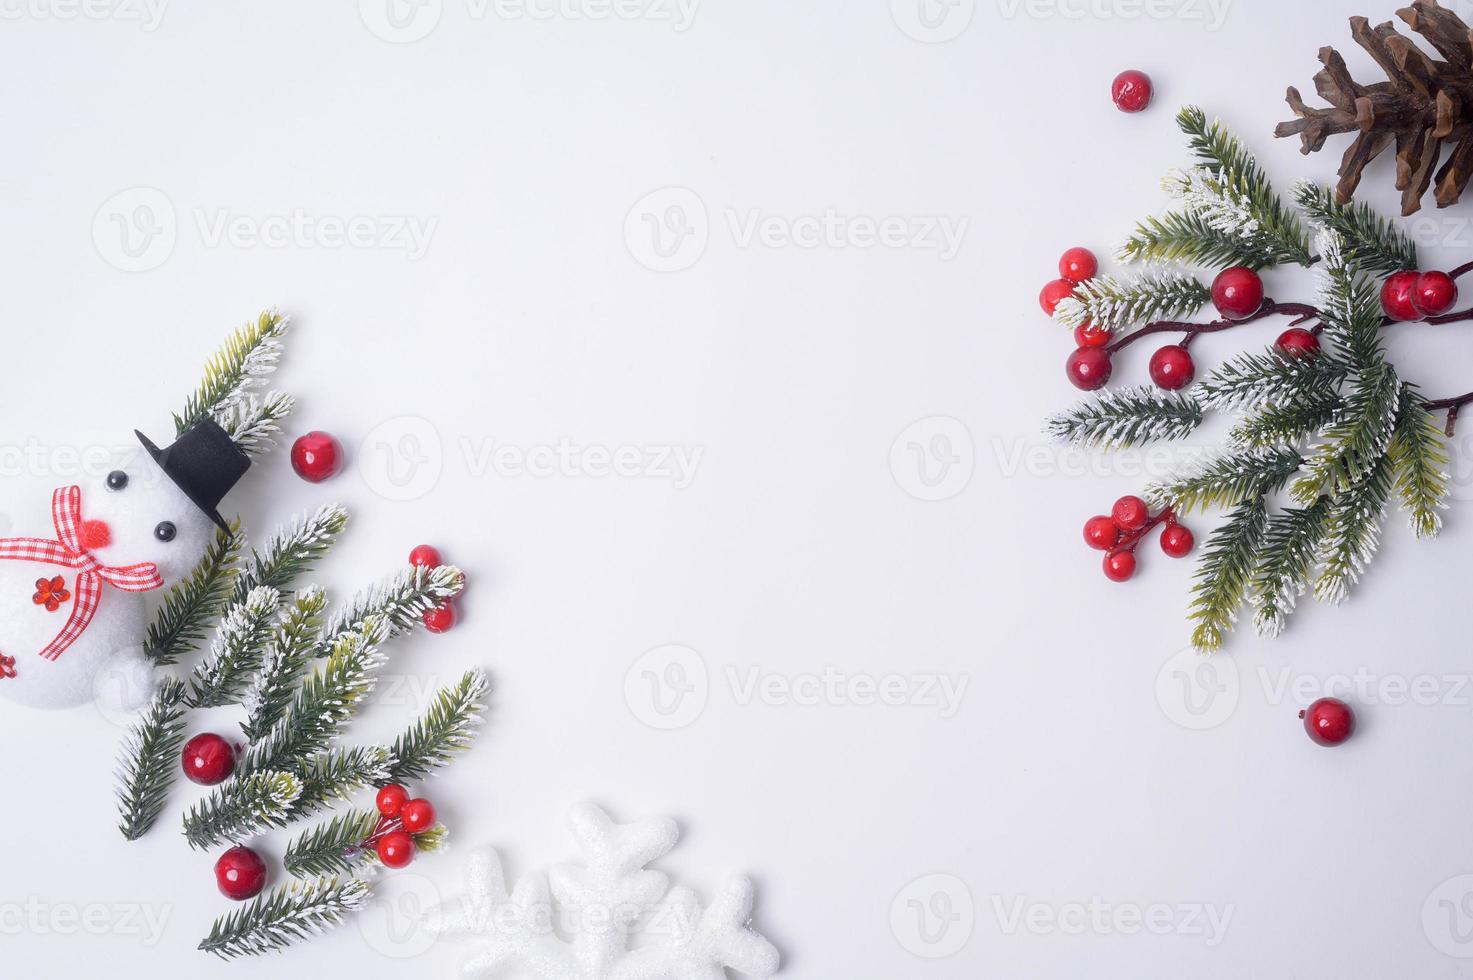 Top view Christmas flat lay  decorations on white background photo